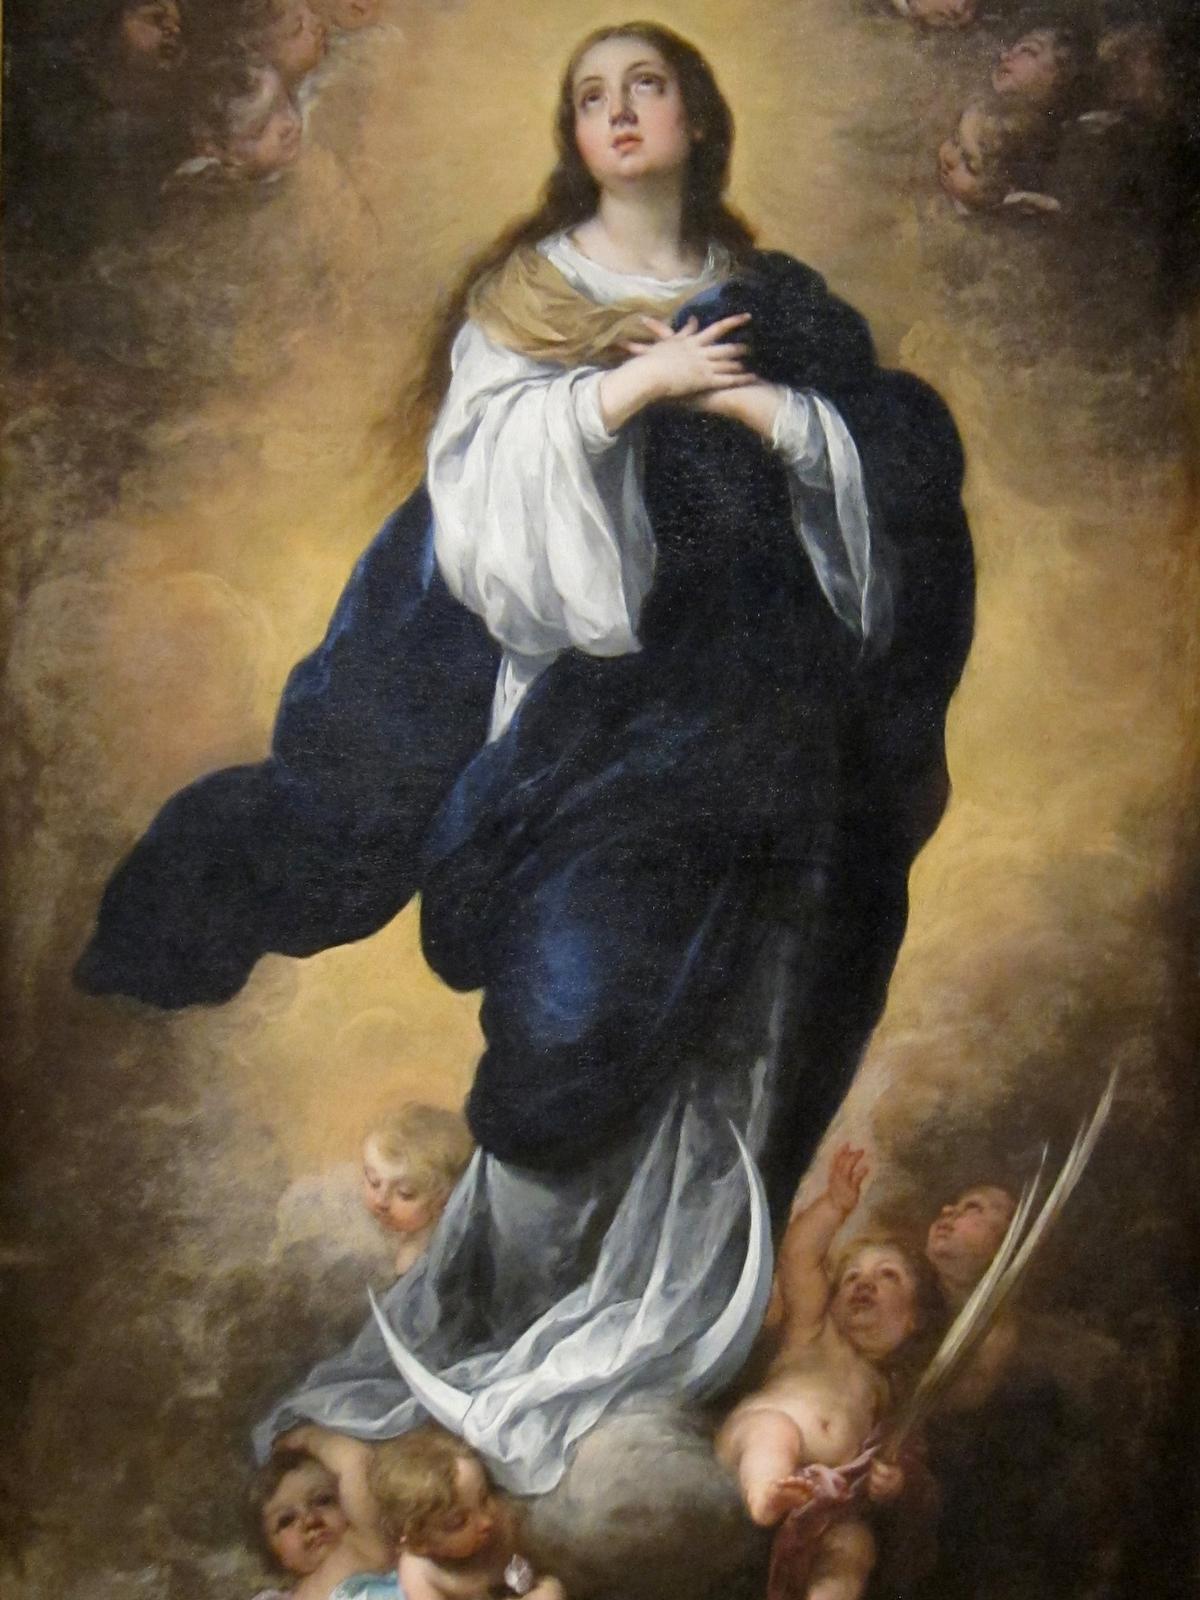 "The Immaculate Conception" by Murillo, Dayton Art Institute